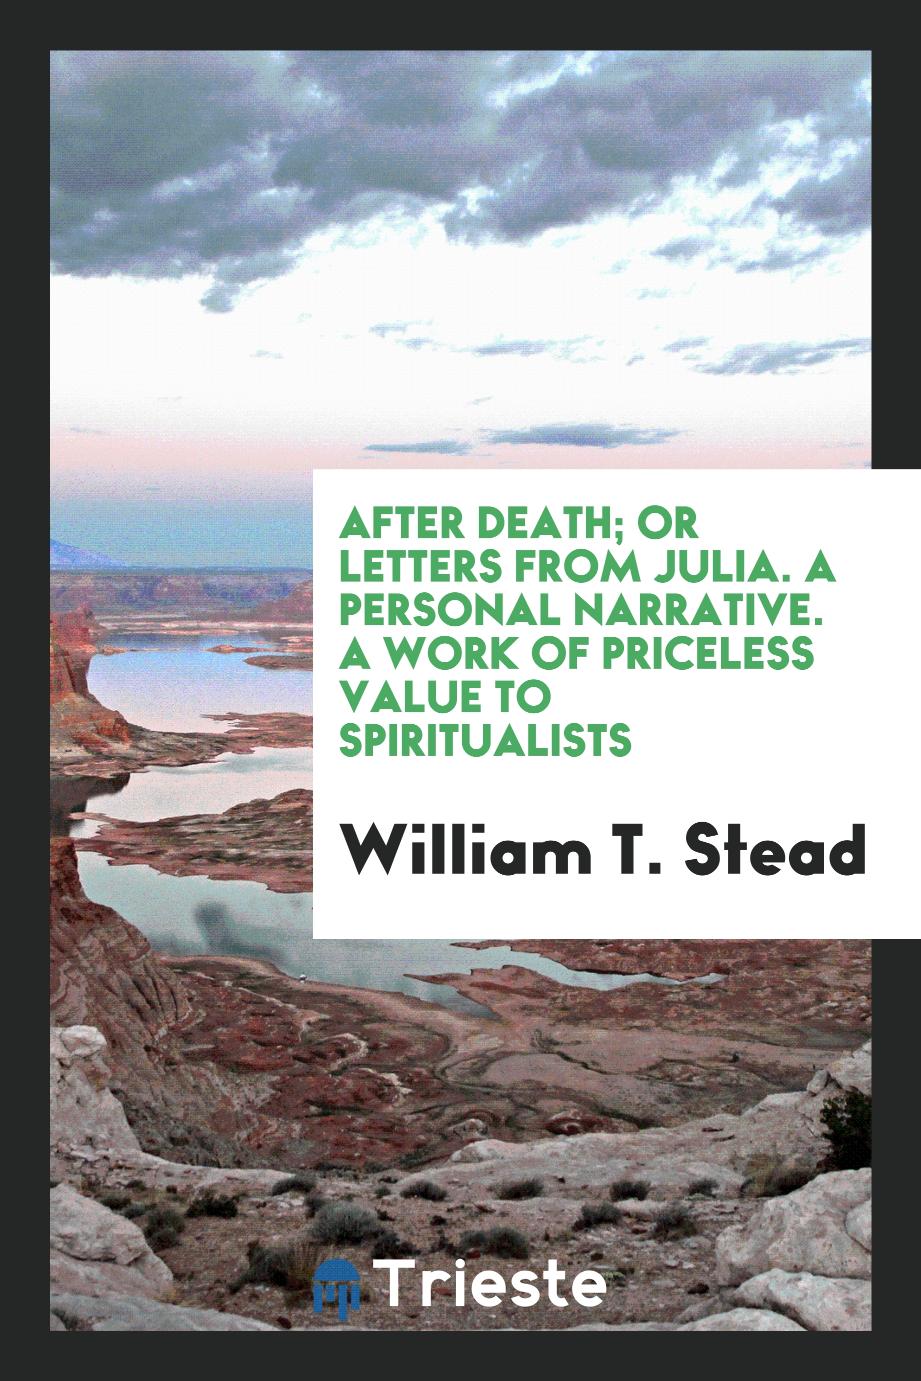 After Death; Or Letters from Julia. A Personal Narrative. A Work of Priceless Value to Spiritualists